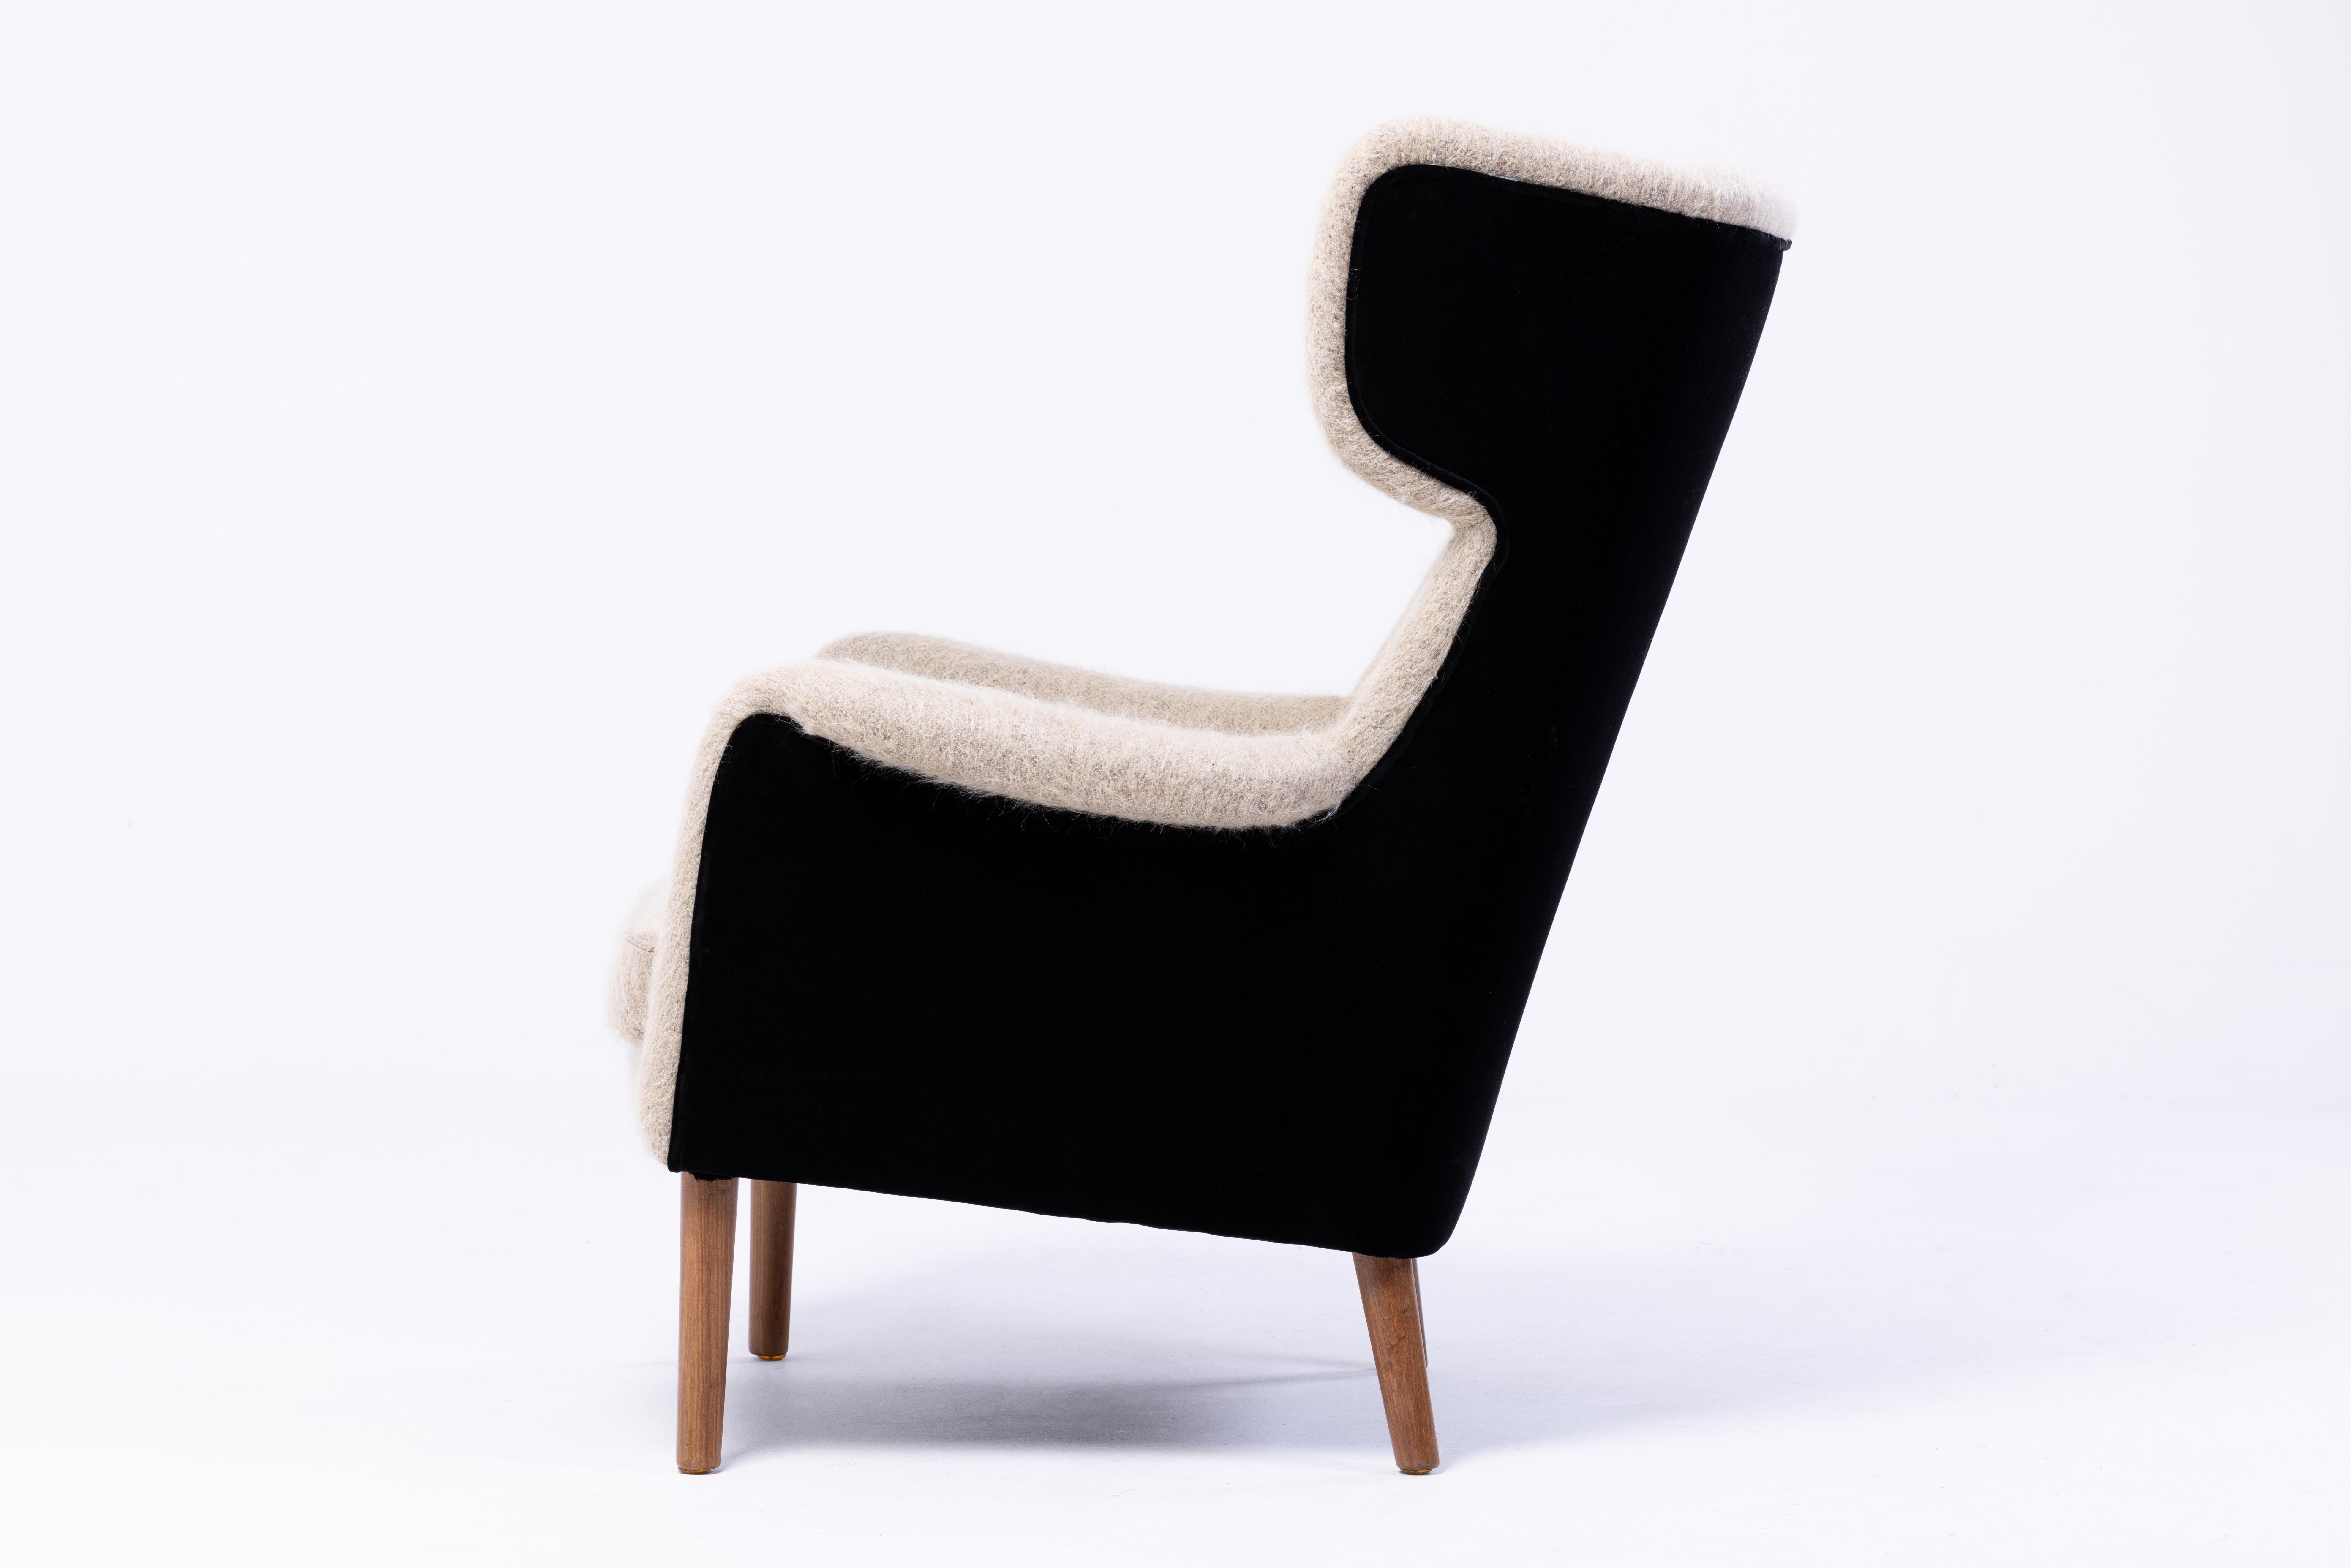 Mid-Century Modern Danish Wingback Armchair, 1950s, in Hèrmes and Pierre Frey Fabric